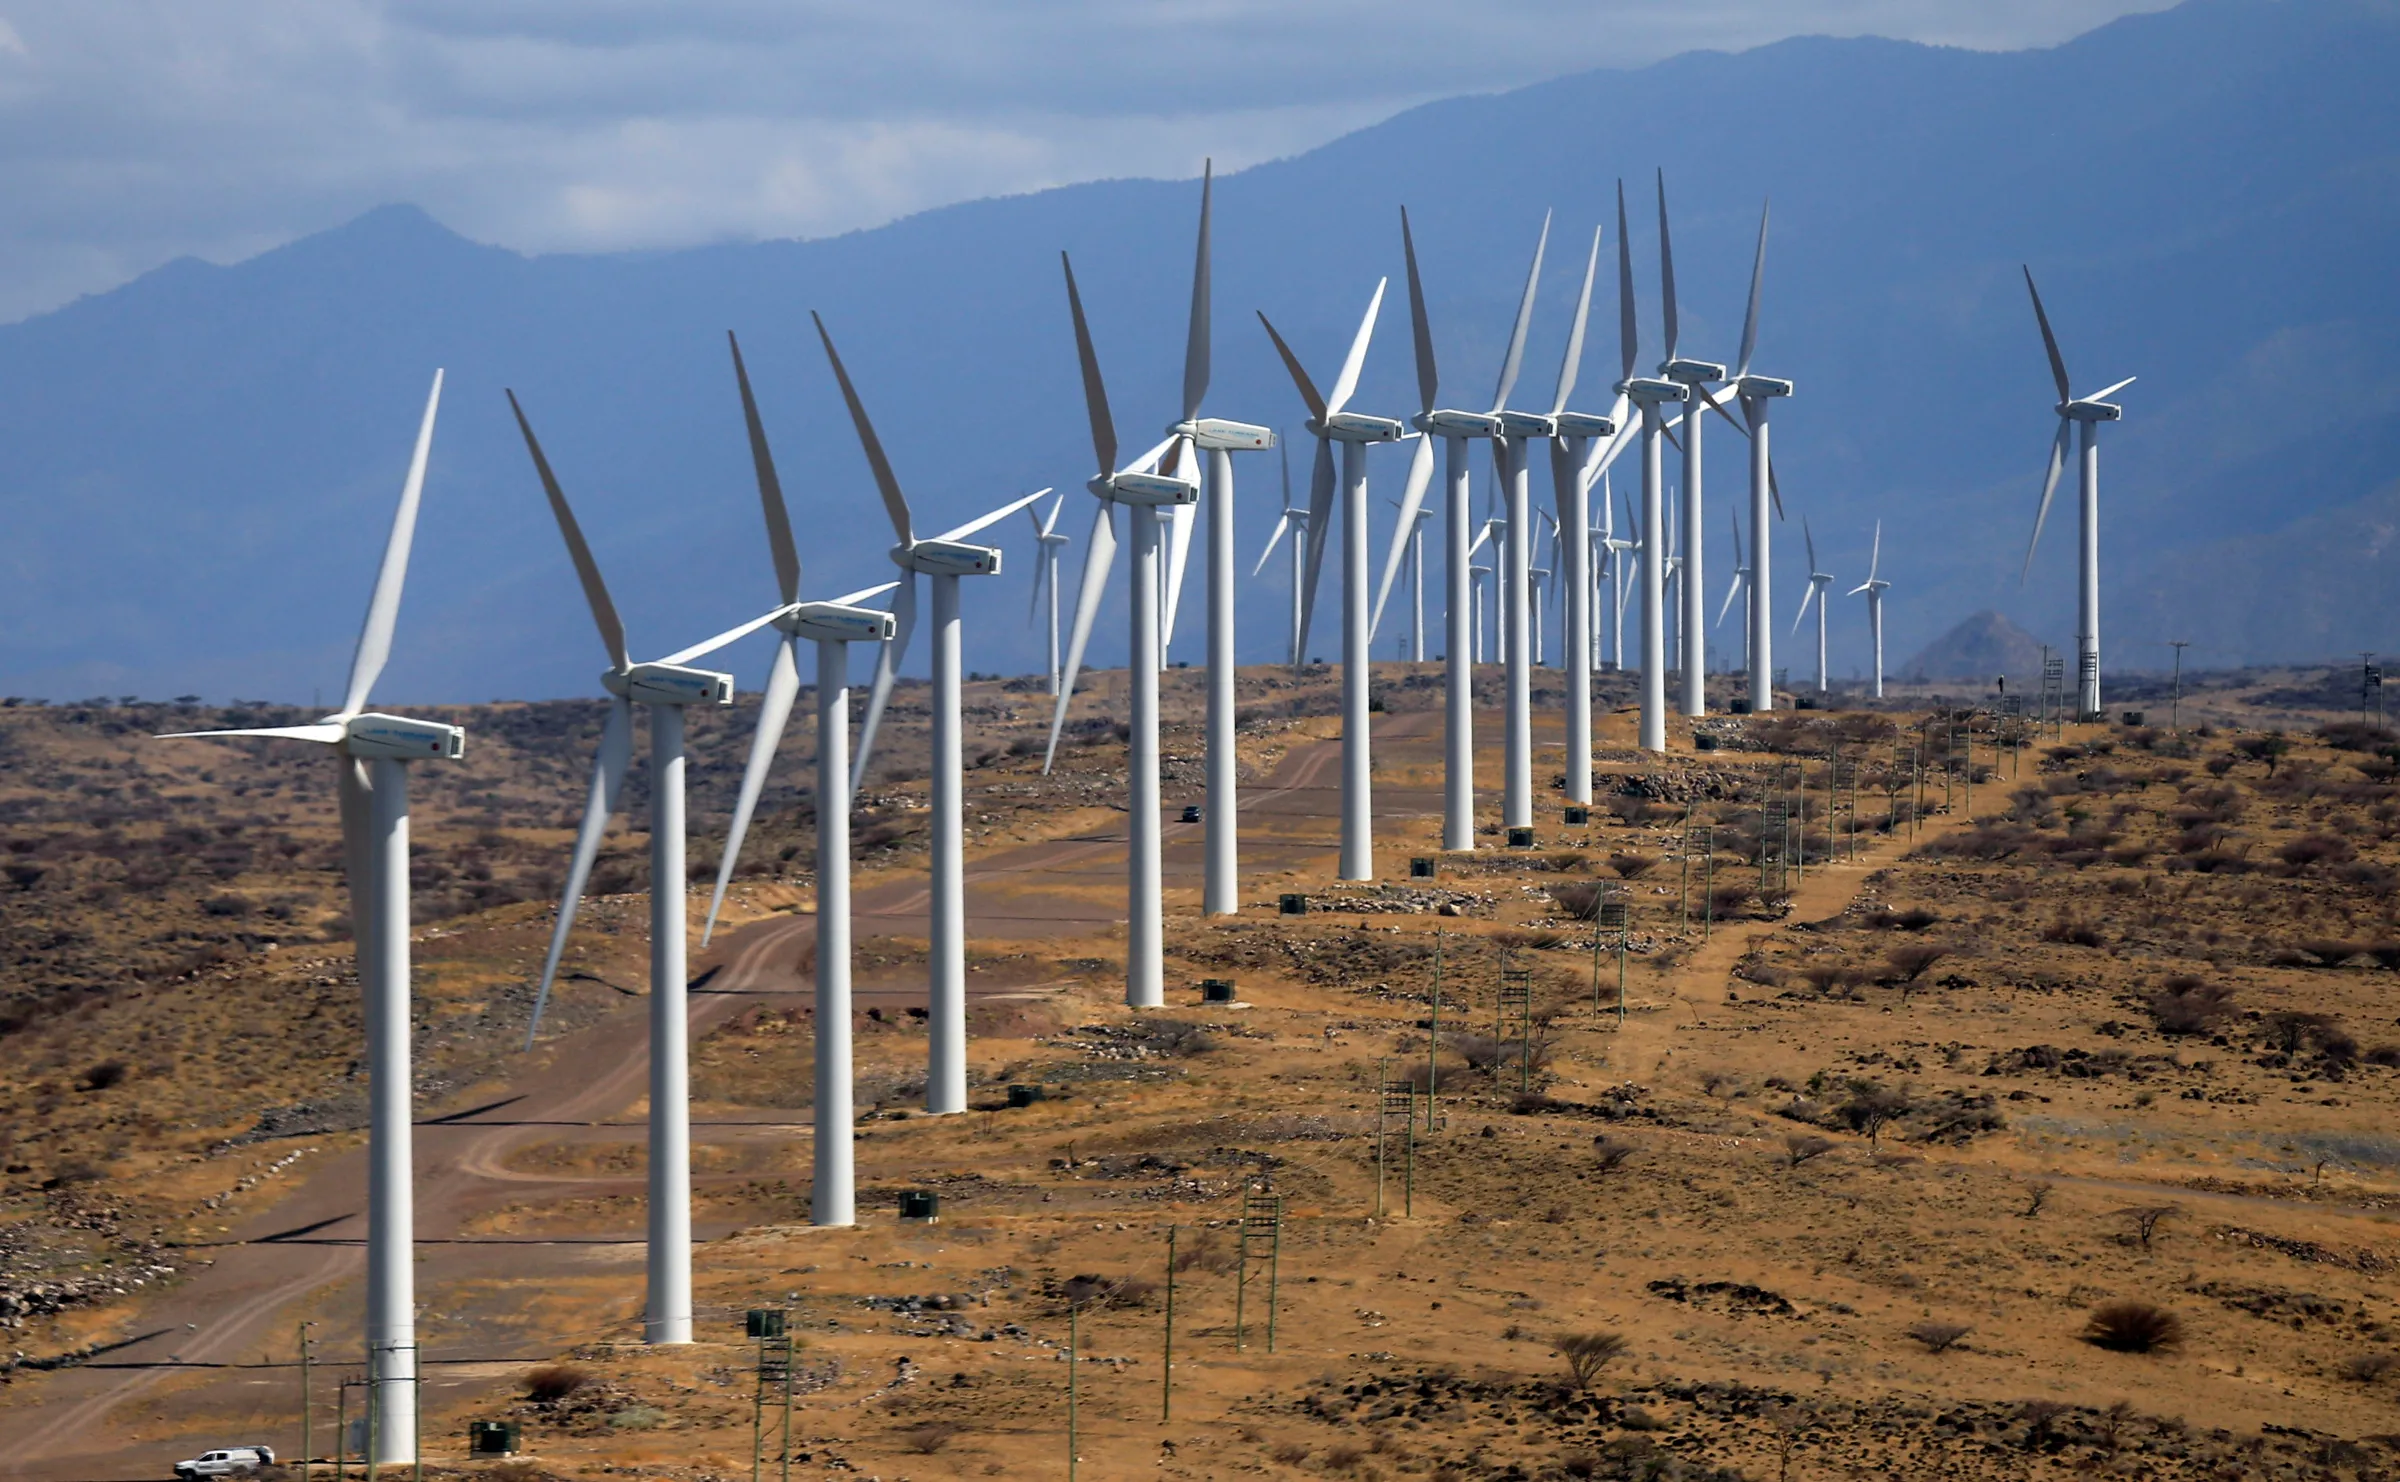 An aerial view shows the power-generating wind turbines seen at the Lake Turkana Wind Power project (LTWP) in Loiyangalani district, Marsabit County, northern Kenya